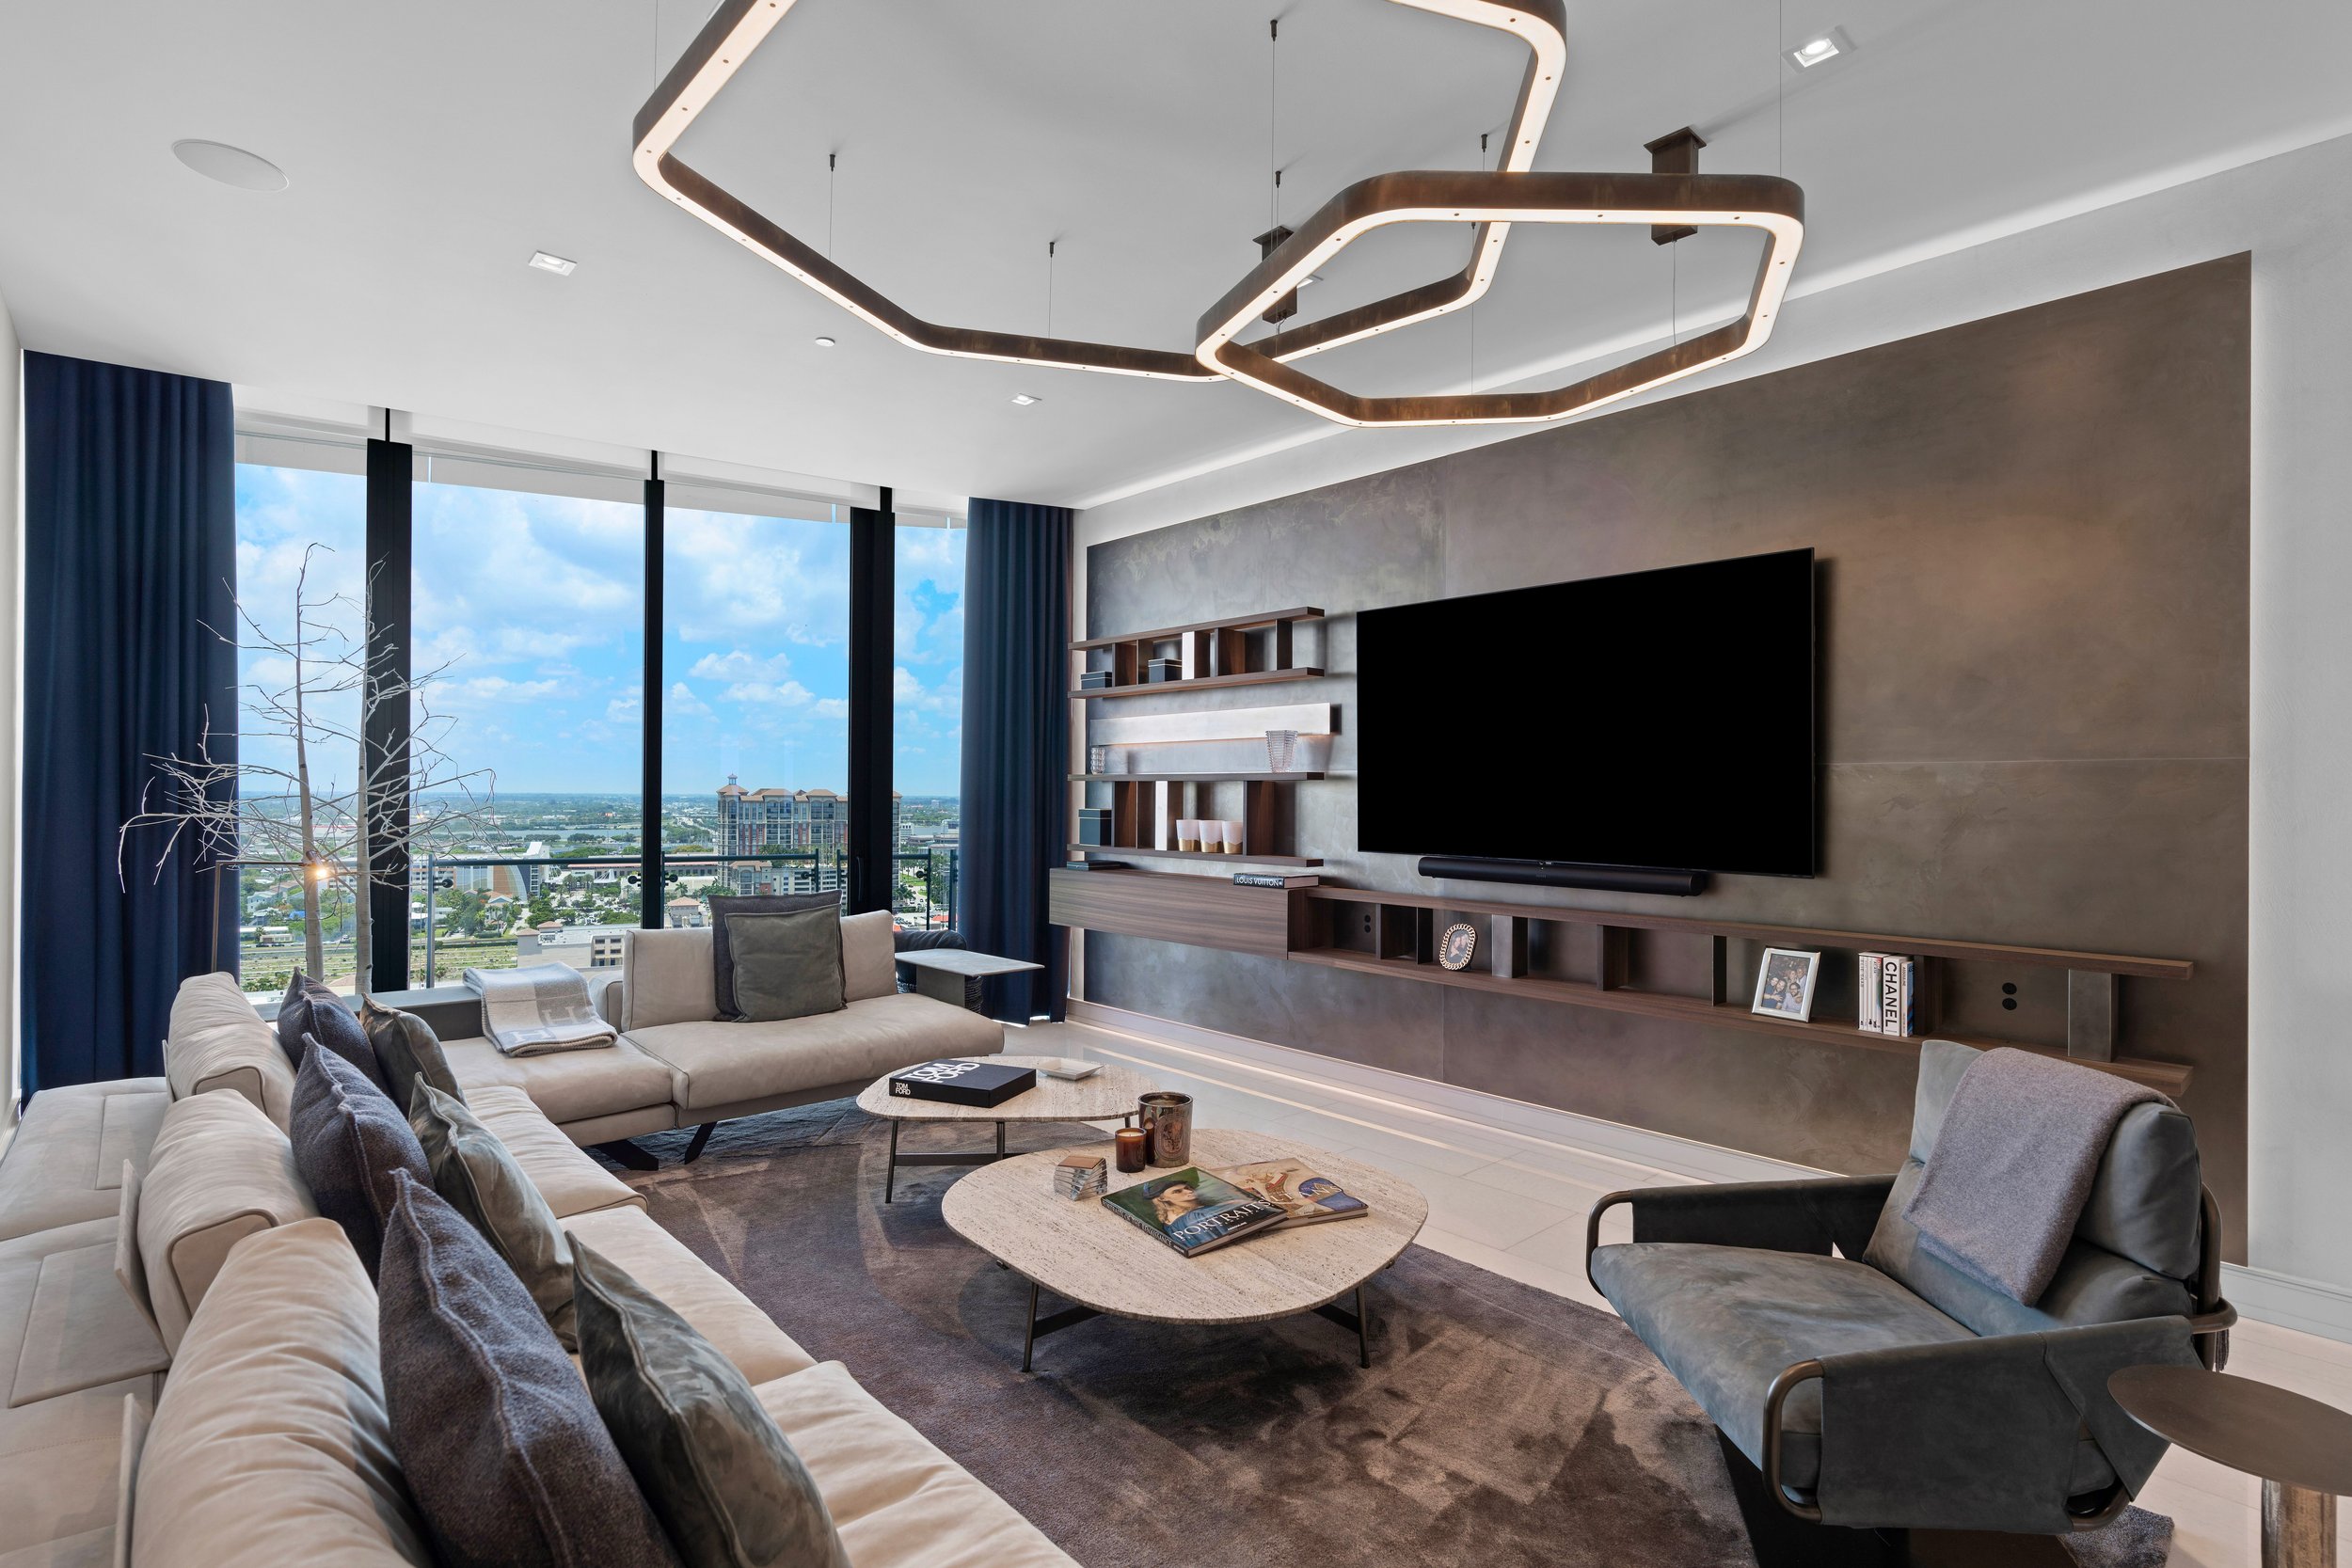 Step Inside An Ultra-Luxe Condo At The Bristol In West Palm Beach Asking $23.9 Million, Over $4,600 Per Square Foot 16.jpg